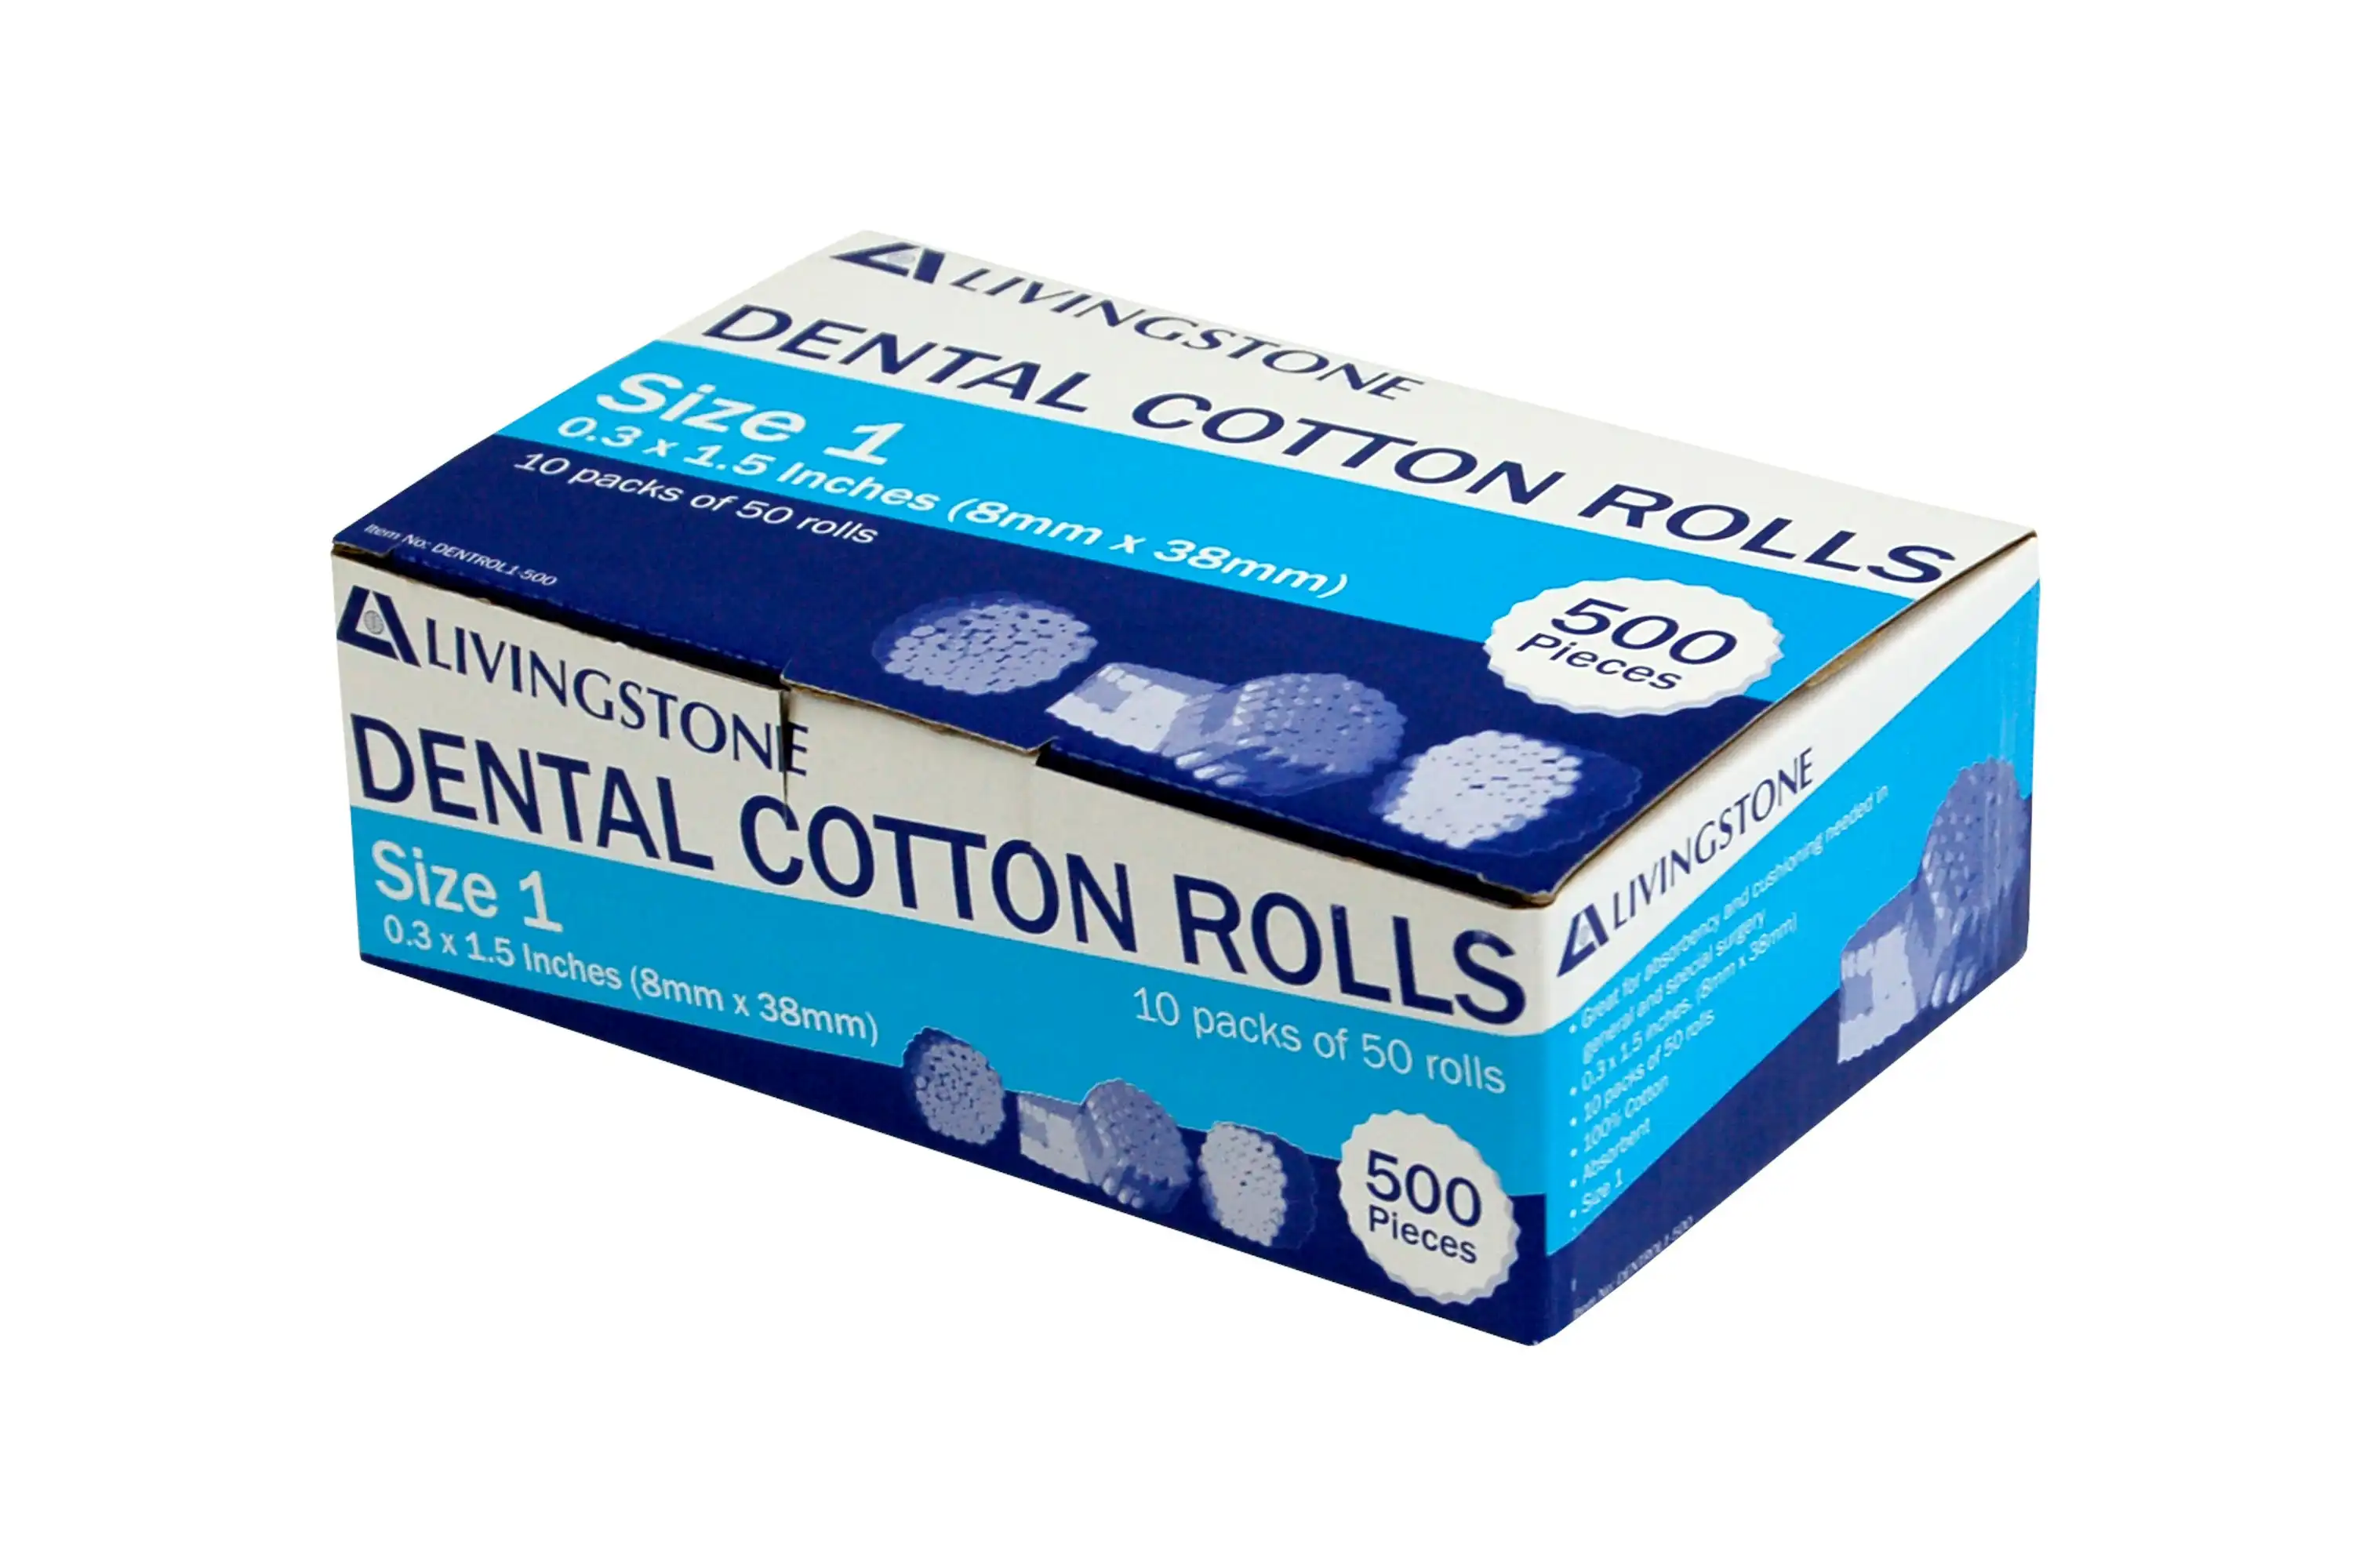 Livingstone Dental Cotton Roll 0.3 x 1.5 Inches Size 1 50 Pack x10